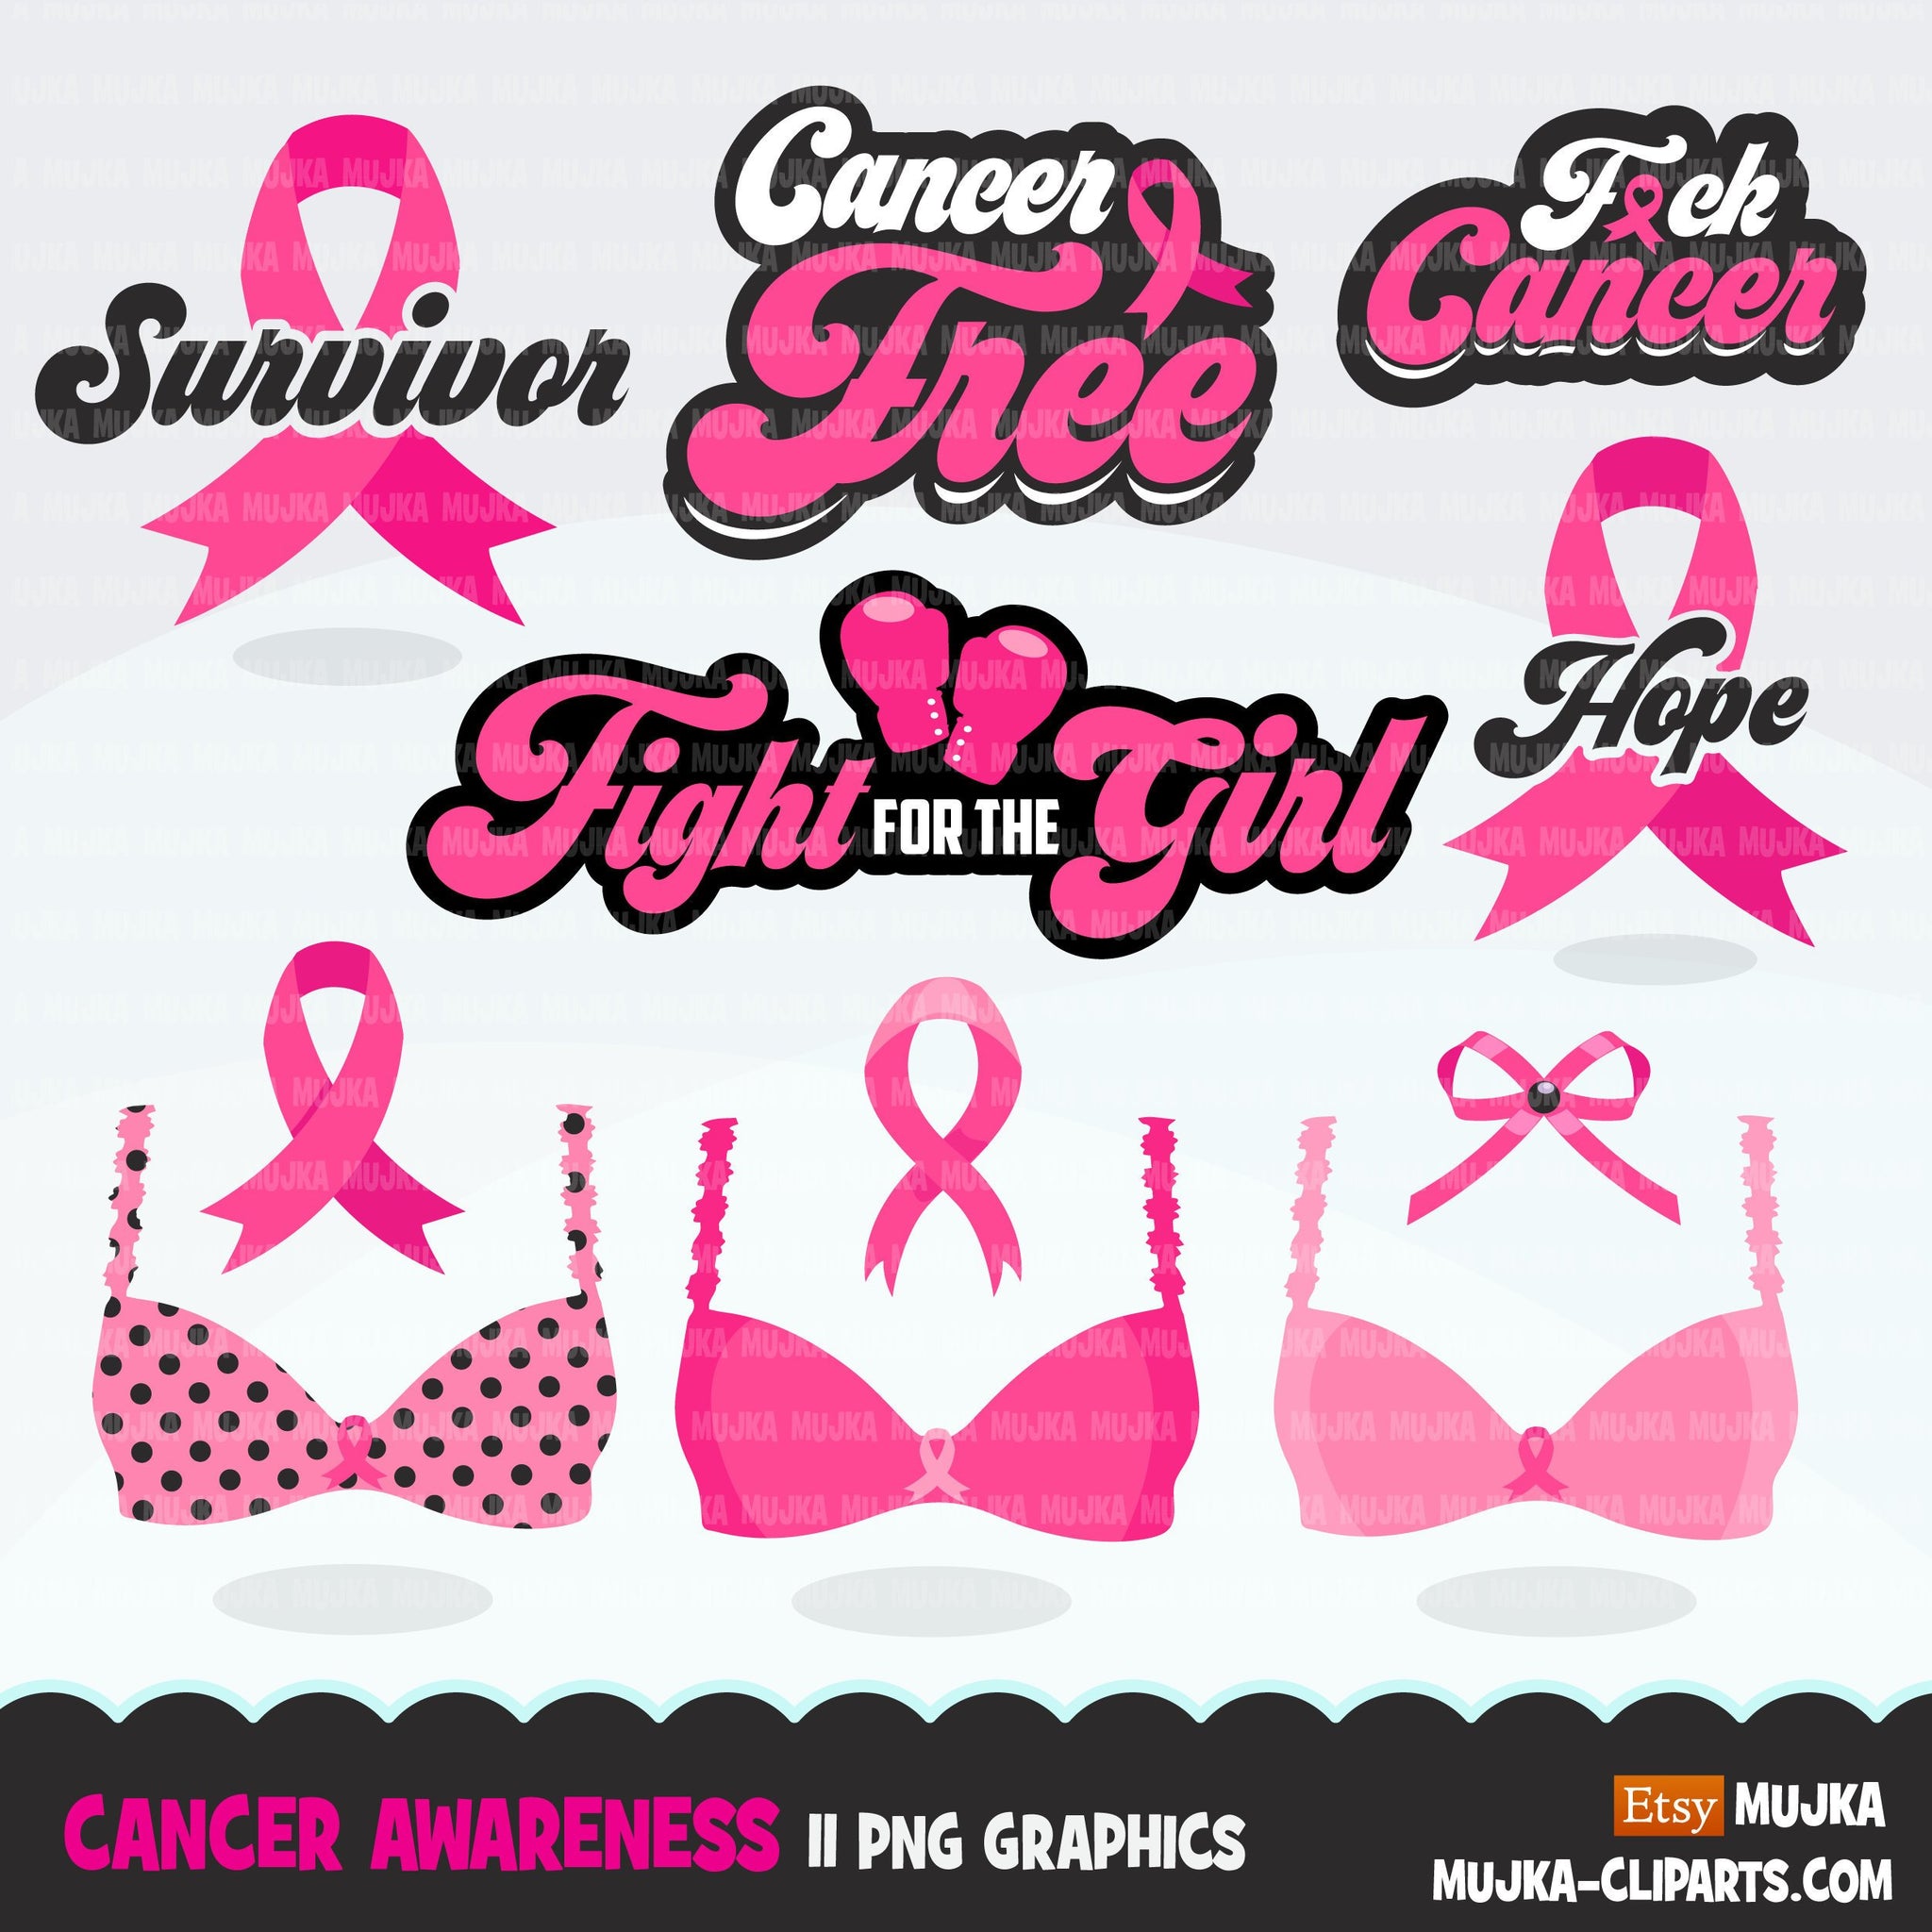 Breast Cancer awareness clipart. Pink boxing gloves, fight for the girl, pink ribbon, pink bra survivor graphics